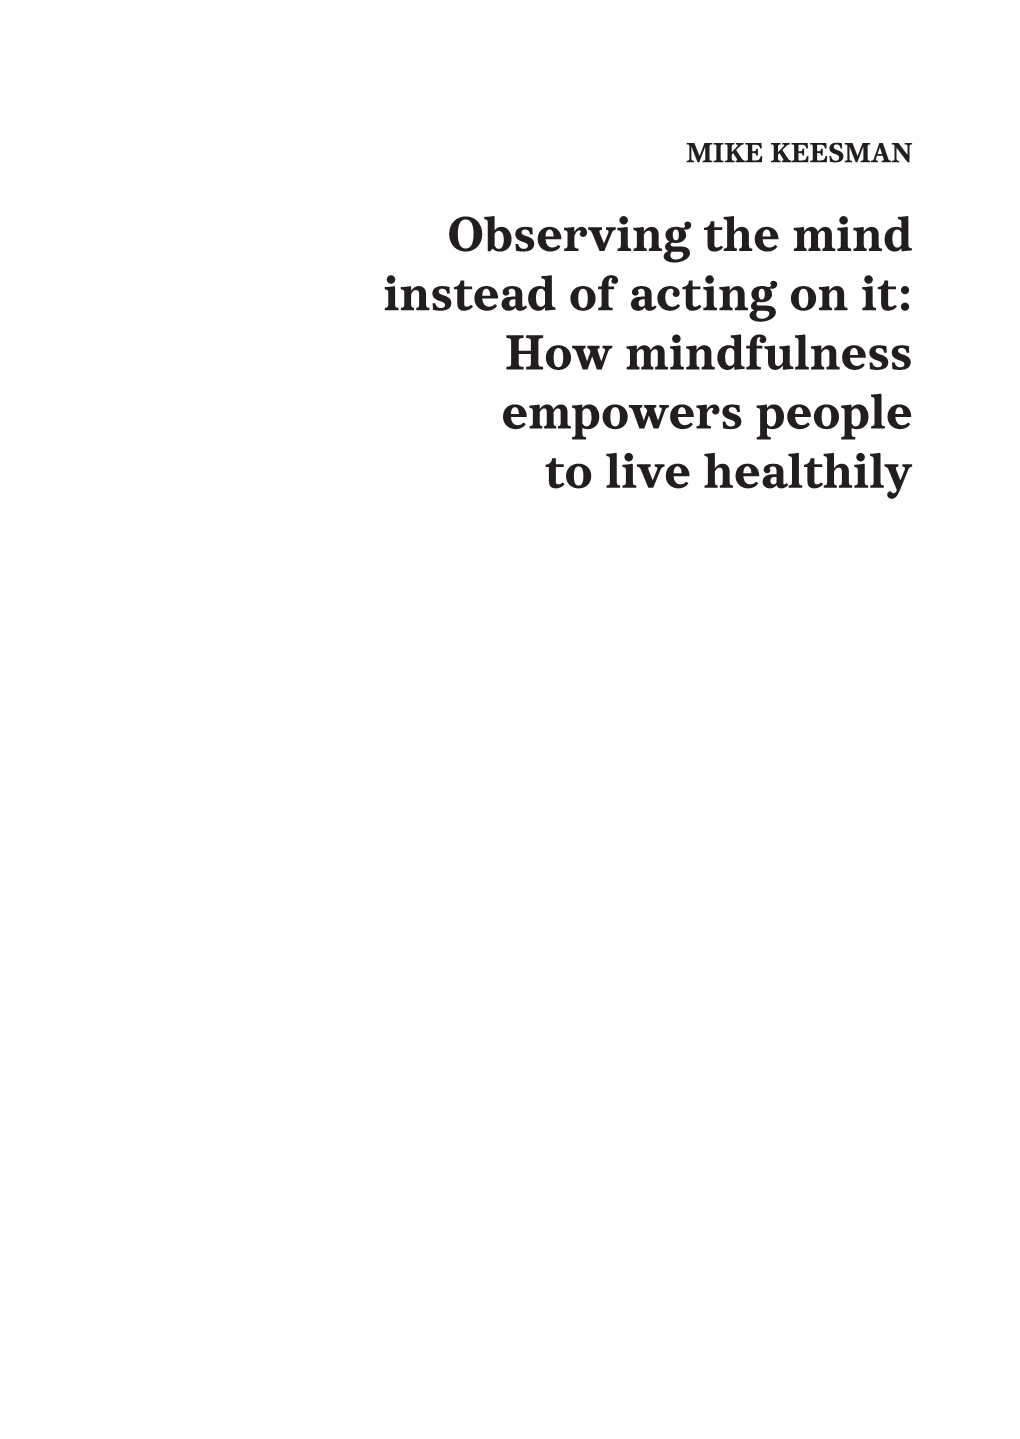 How Mindfulness Empowers People to Live Healthily ISBN: 978-94-92303-21-9